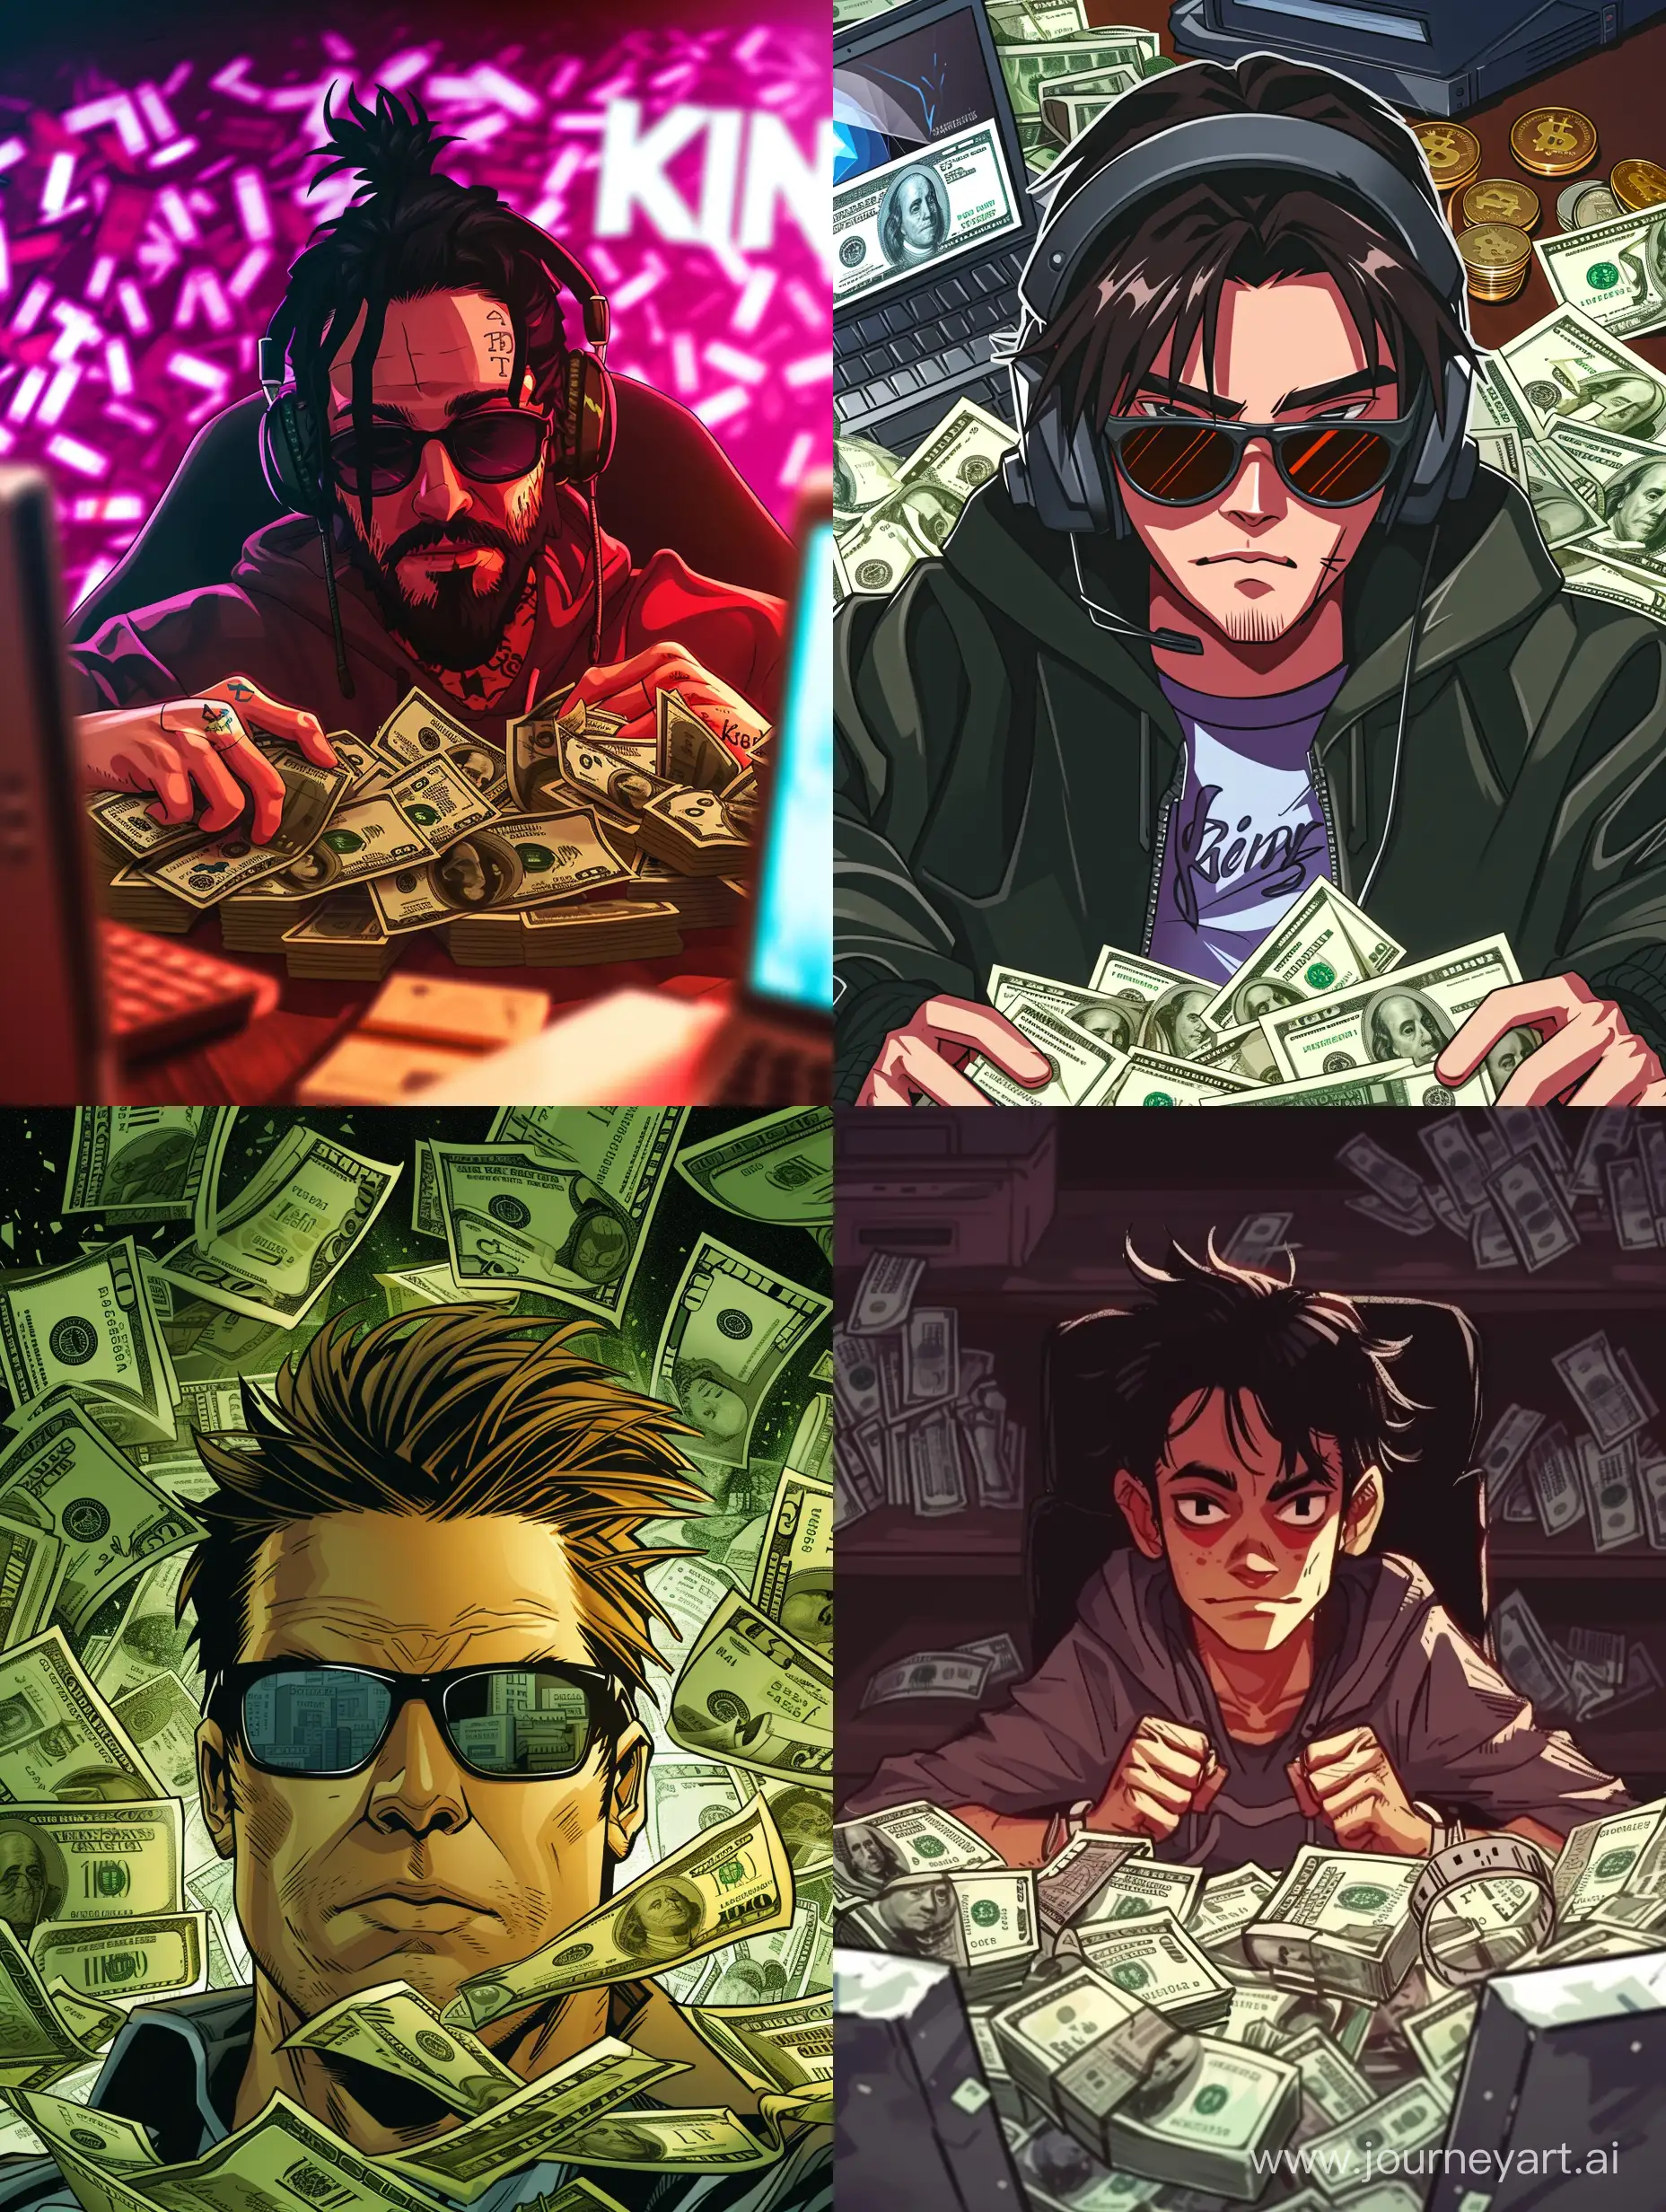 Image of a hacker character, lots of money, with the text ๖ۣۜKevin in the background